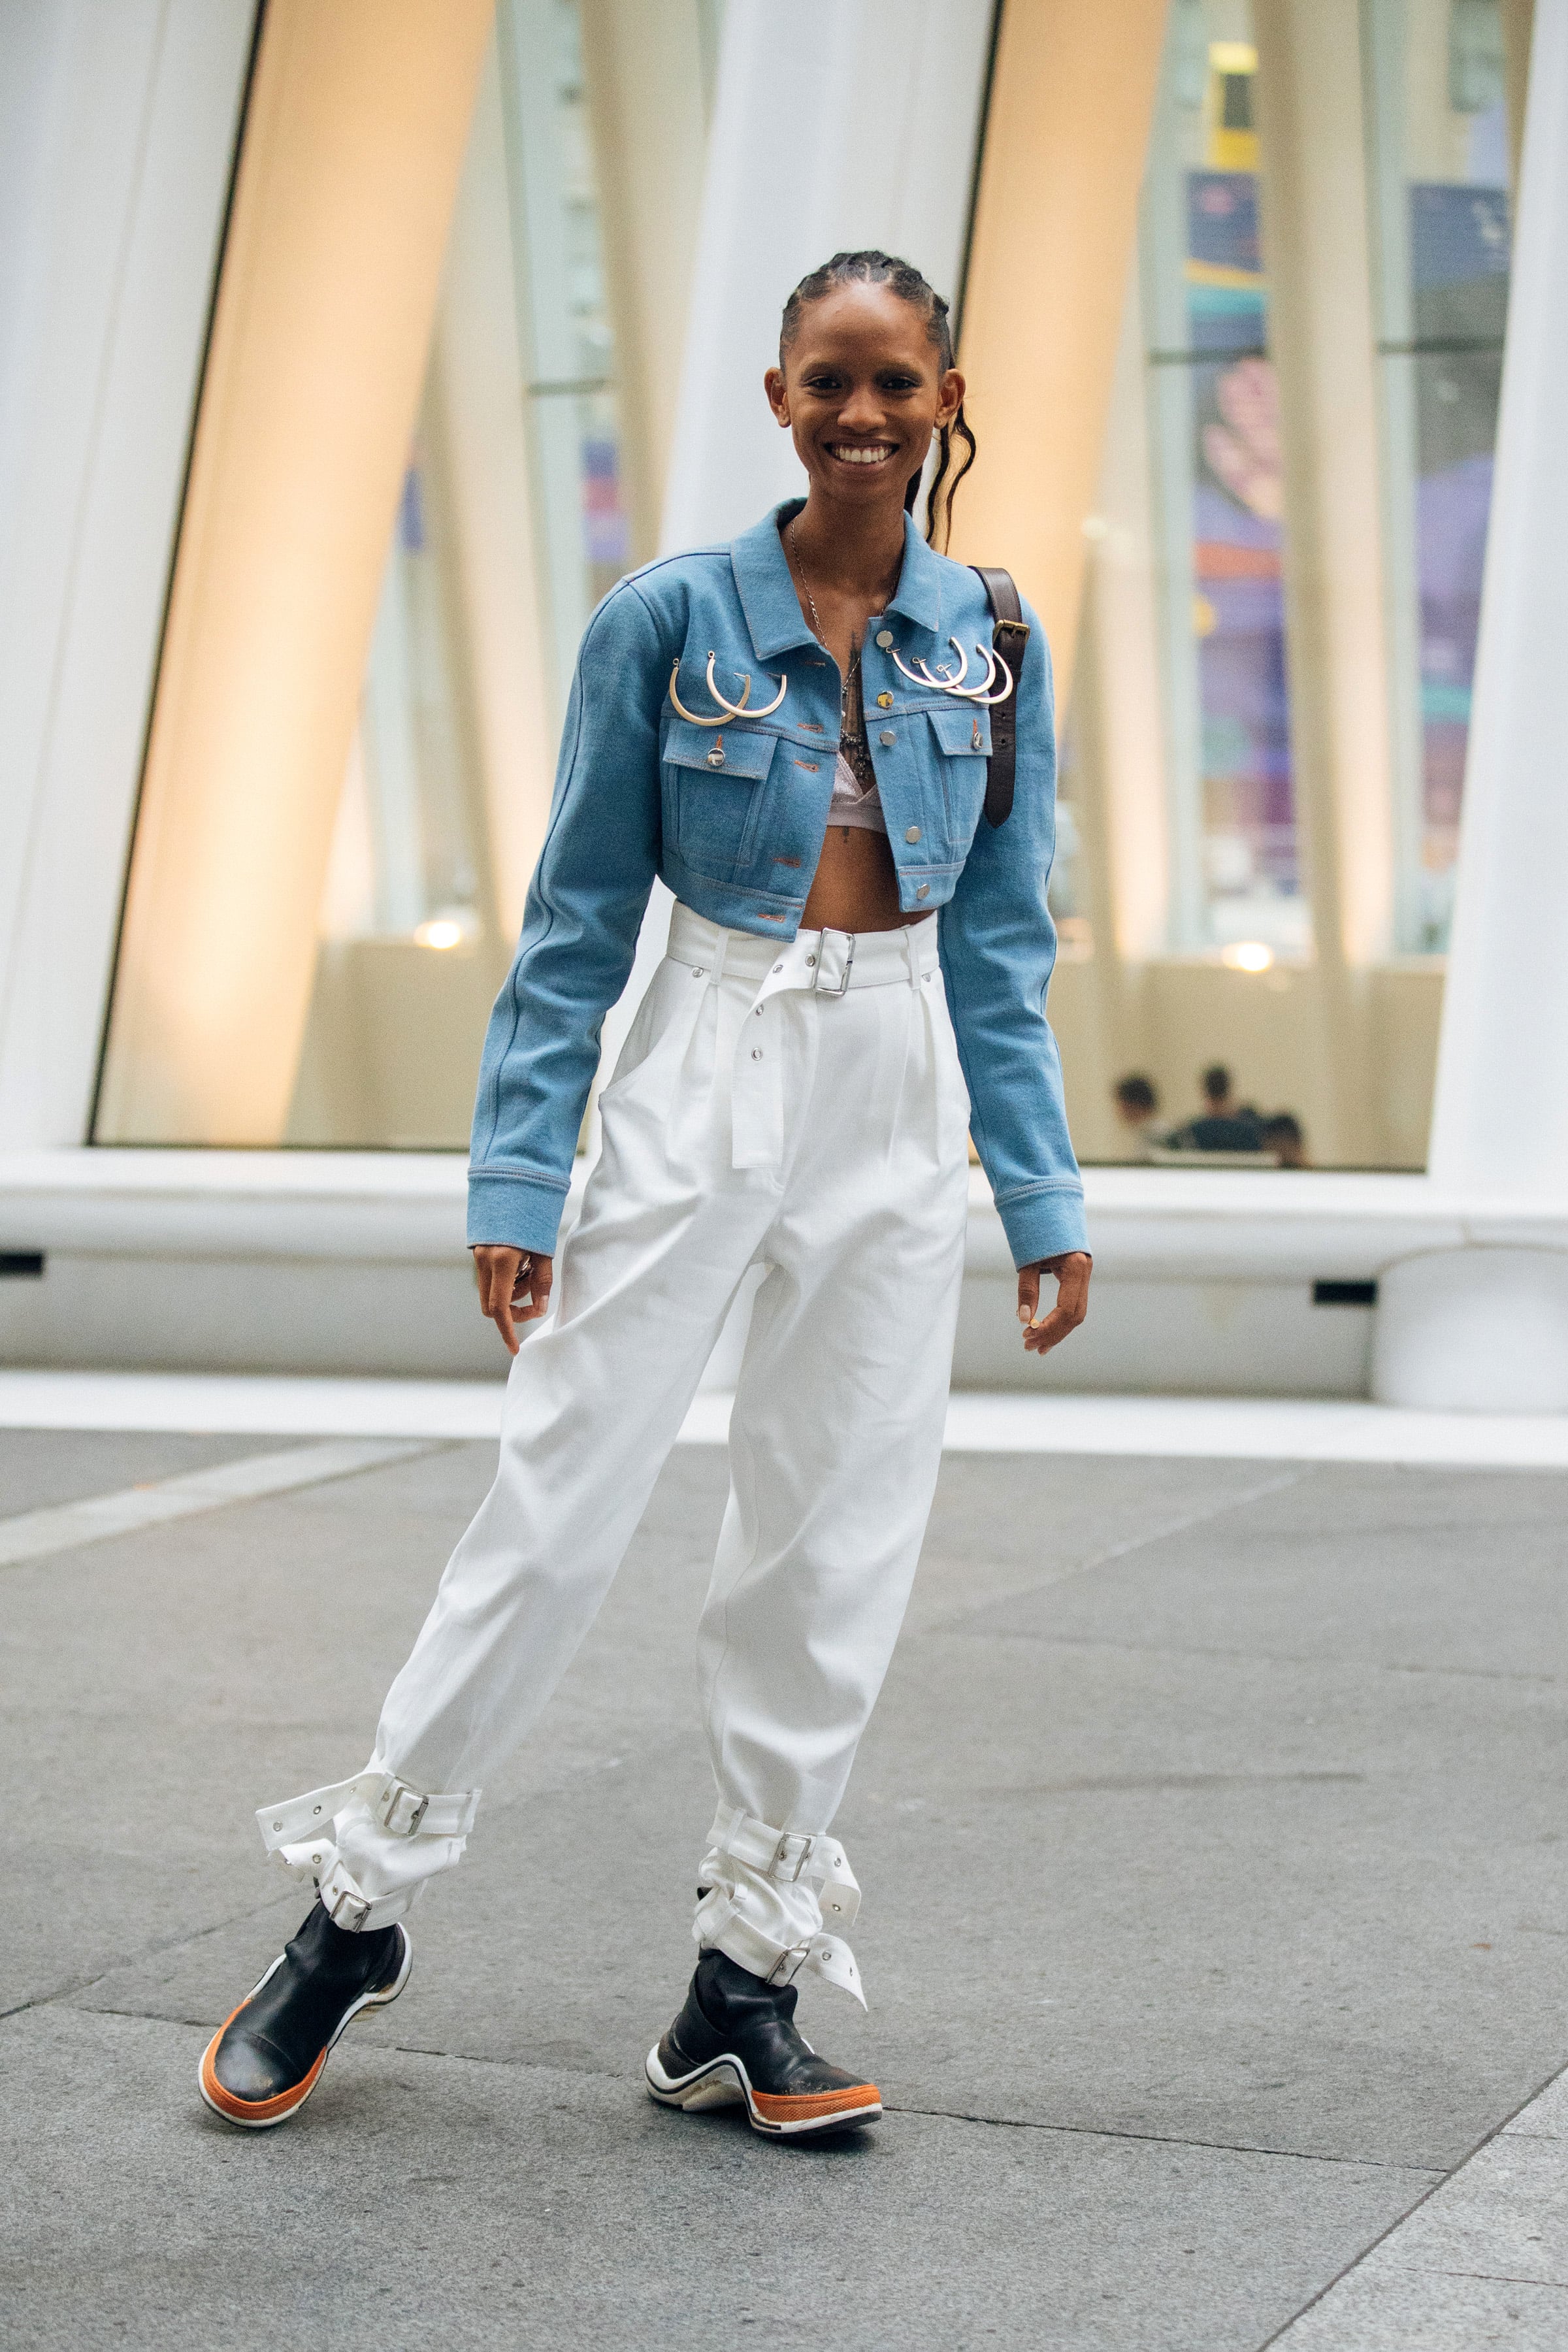 Denim-Jacket Outfit Ideas For Spring and Summer